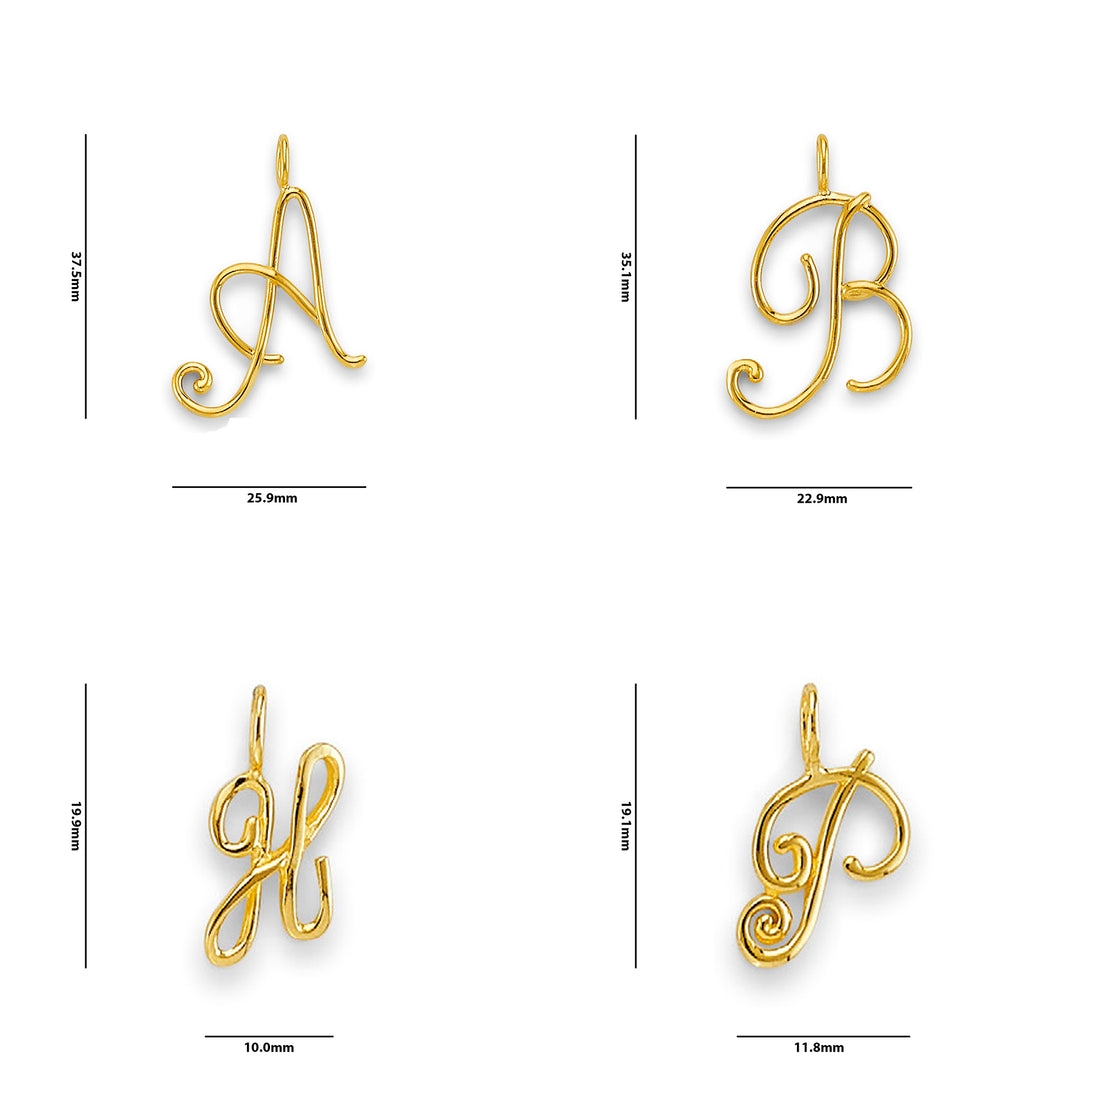 Yellow Gold Calligraphed Initial Letter Pendant with Measurement